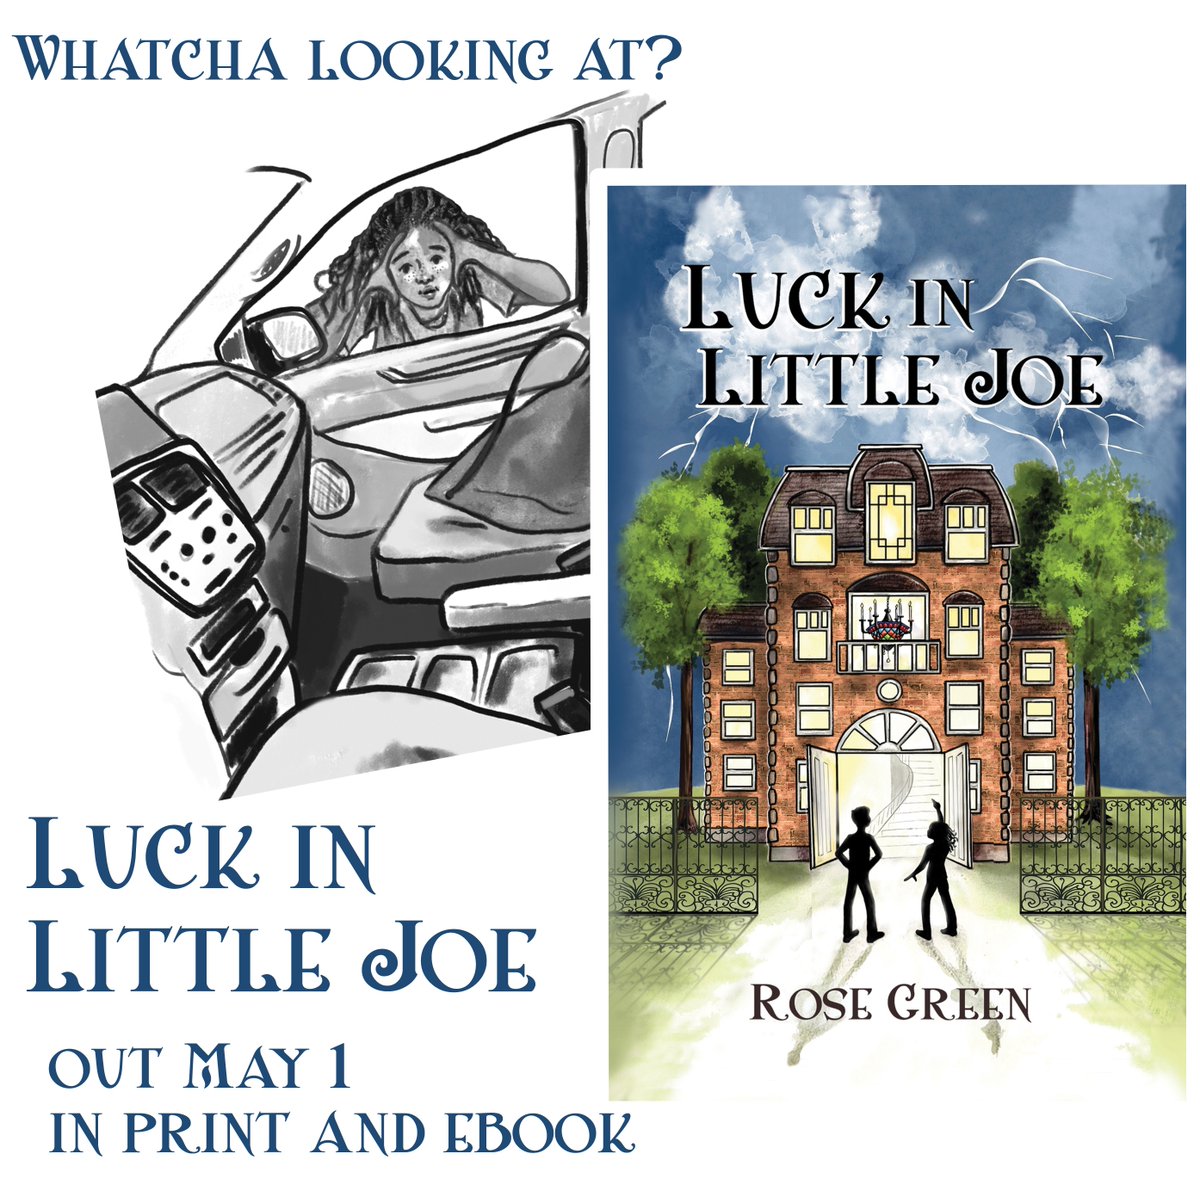 Follow the adventures of Shiloh as she tries to break the grip a curse has on her family and reclaim the luck they once had. Luck in Little Joe, coming May 1 in print and ebook. books2read.com/luckinlittlejoe

#middlegradefantasy #middlegradeadventure #middlegradefiction